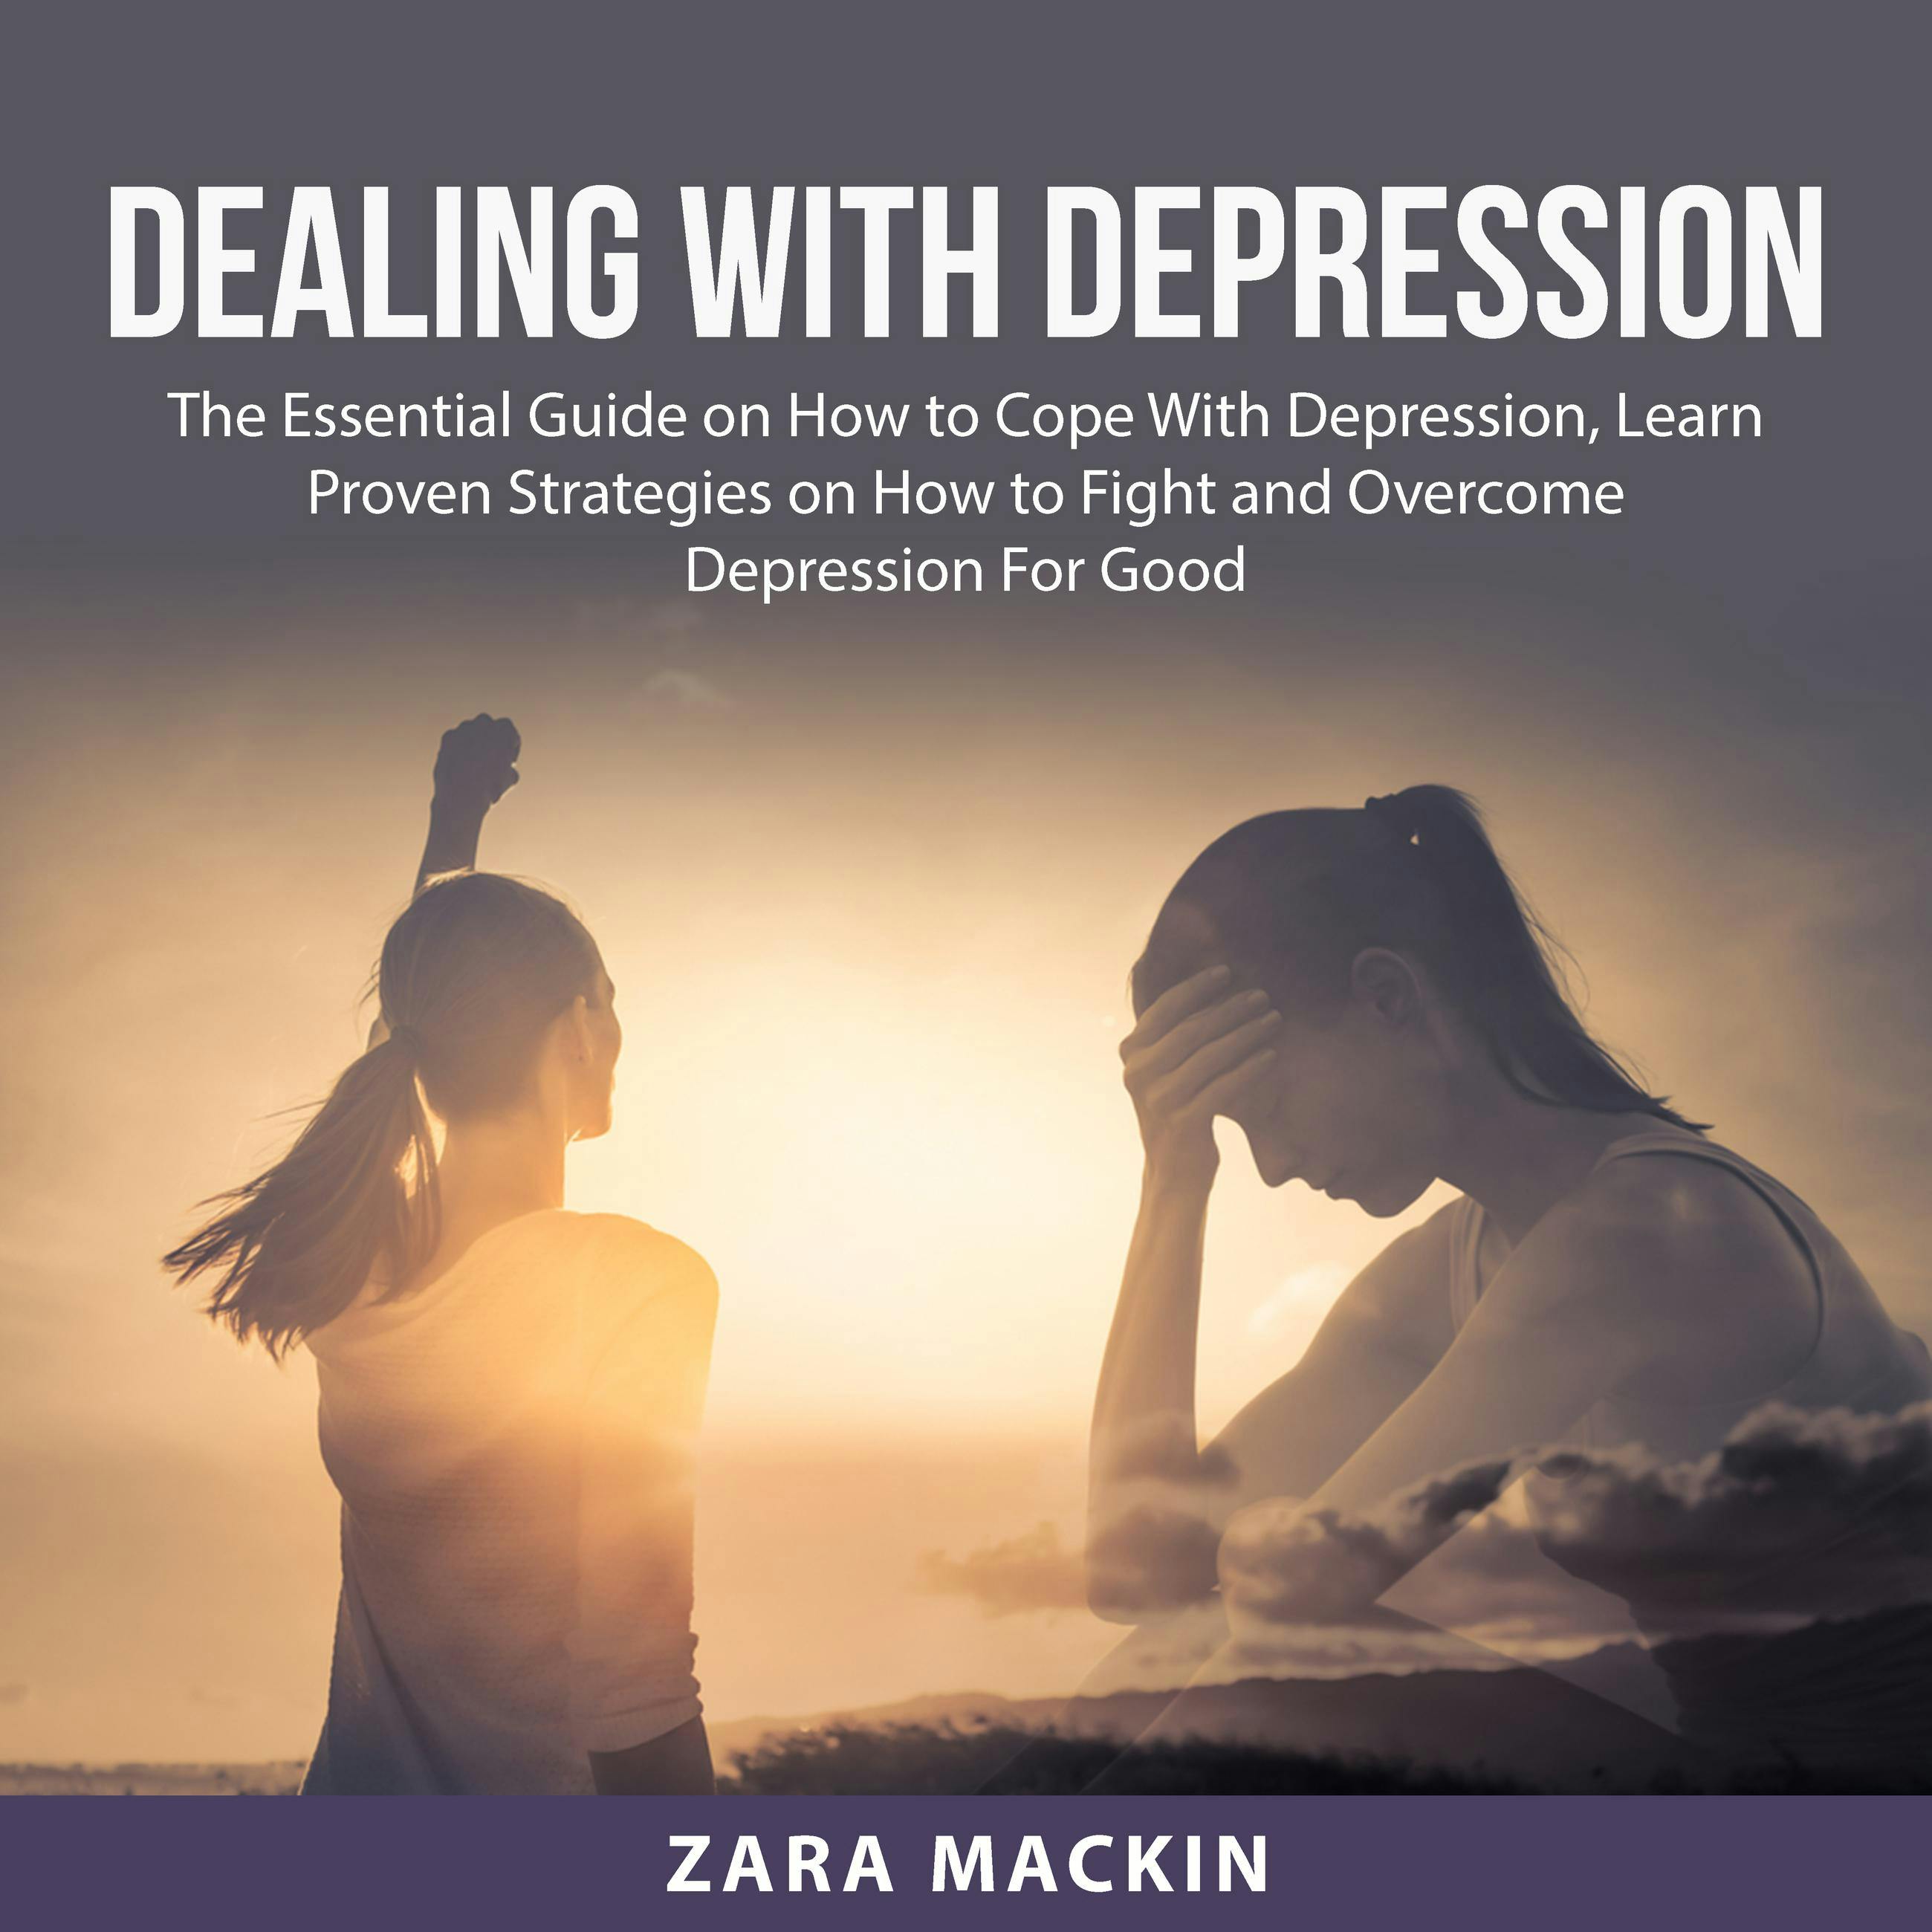 Dealing With Depression: The Essential Guide on How to Cope With Depression, Learn Proven Strategies on How to Fight and Overcome Depression For Good - undefined